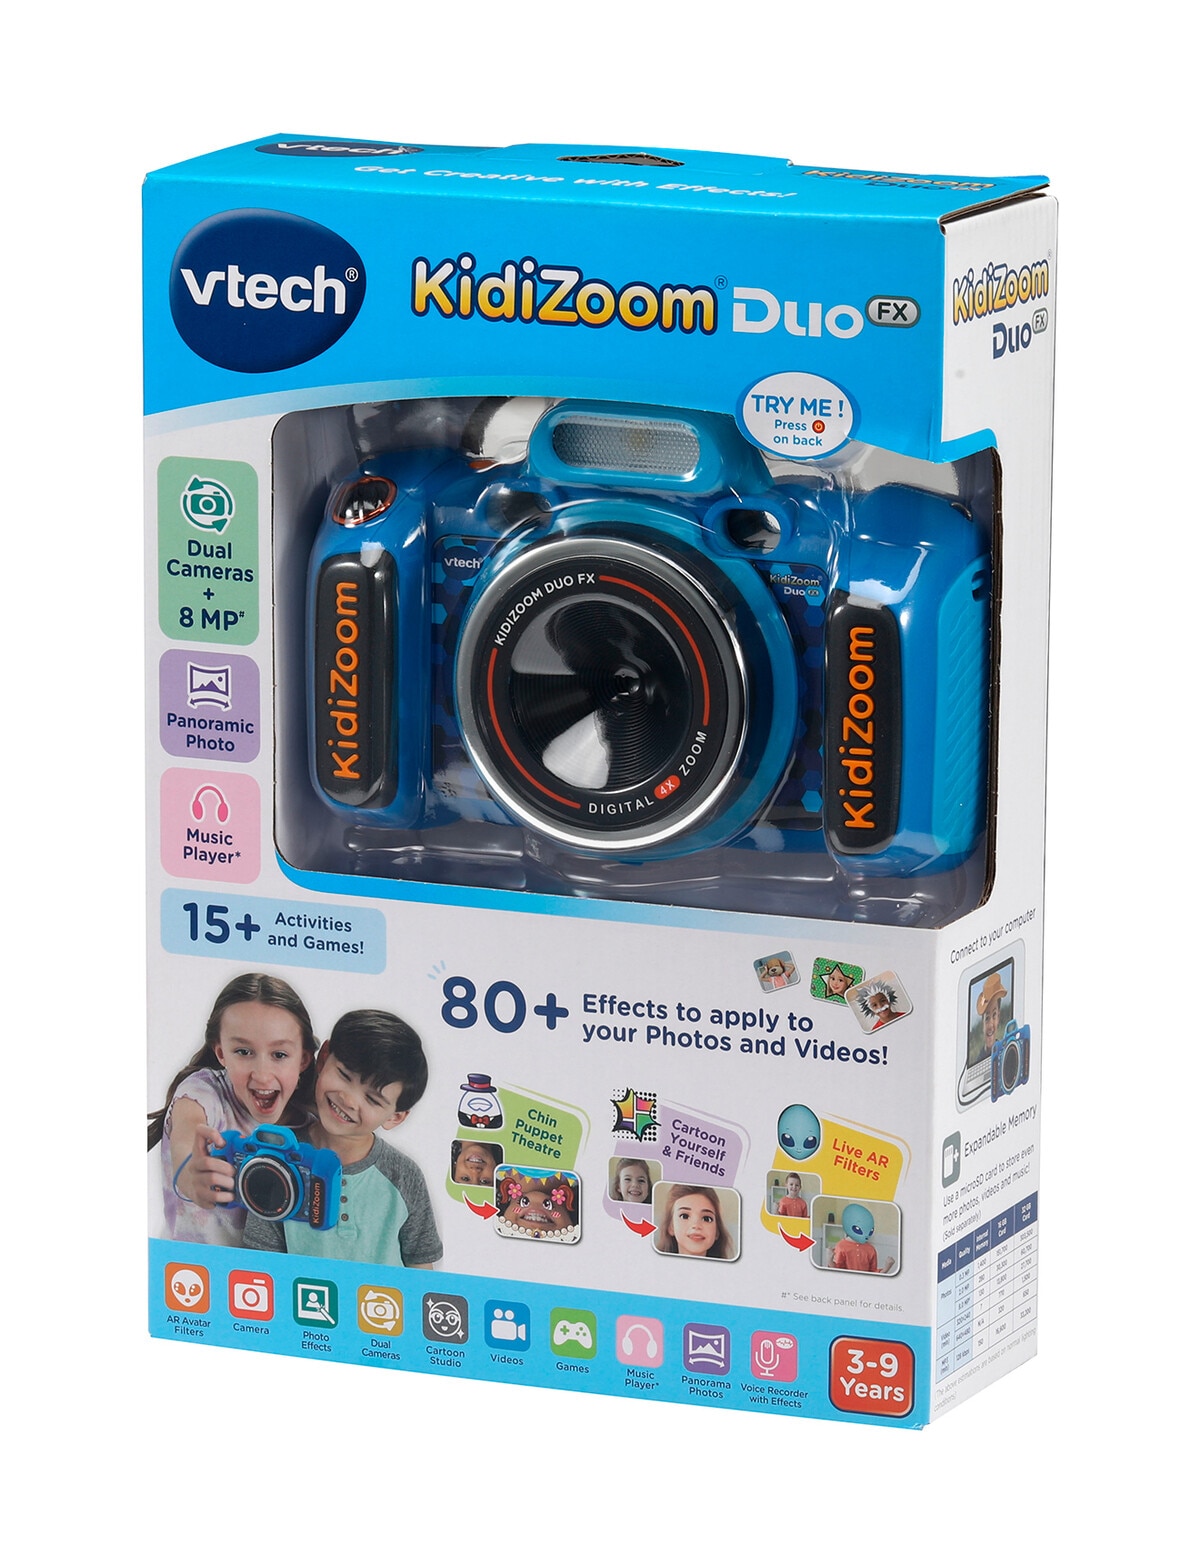 Kidizoom Camera From VTech - The New York Times